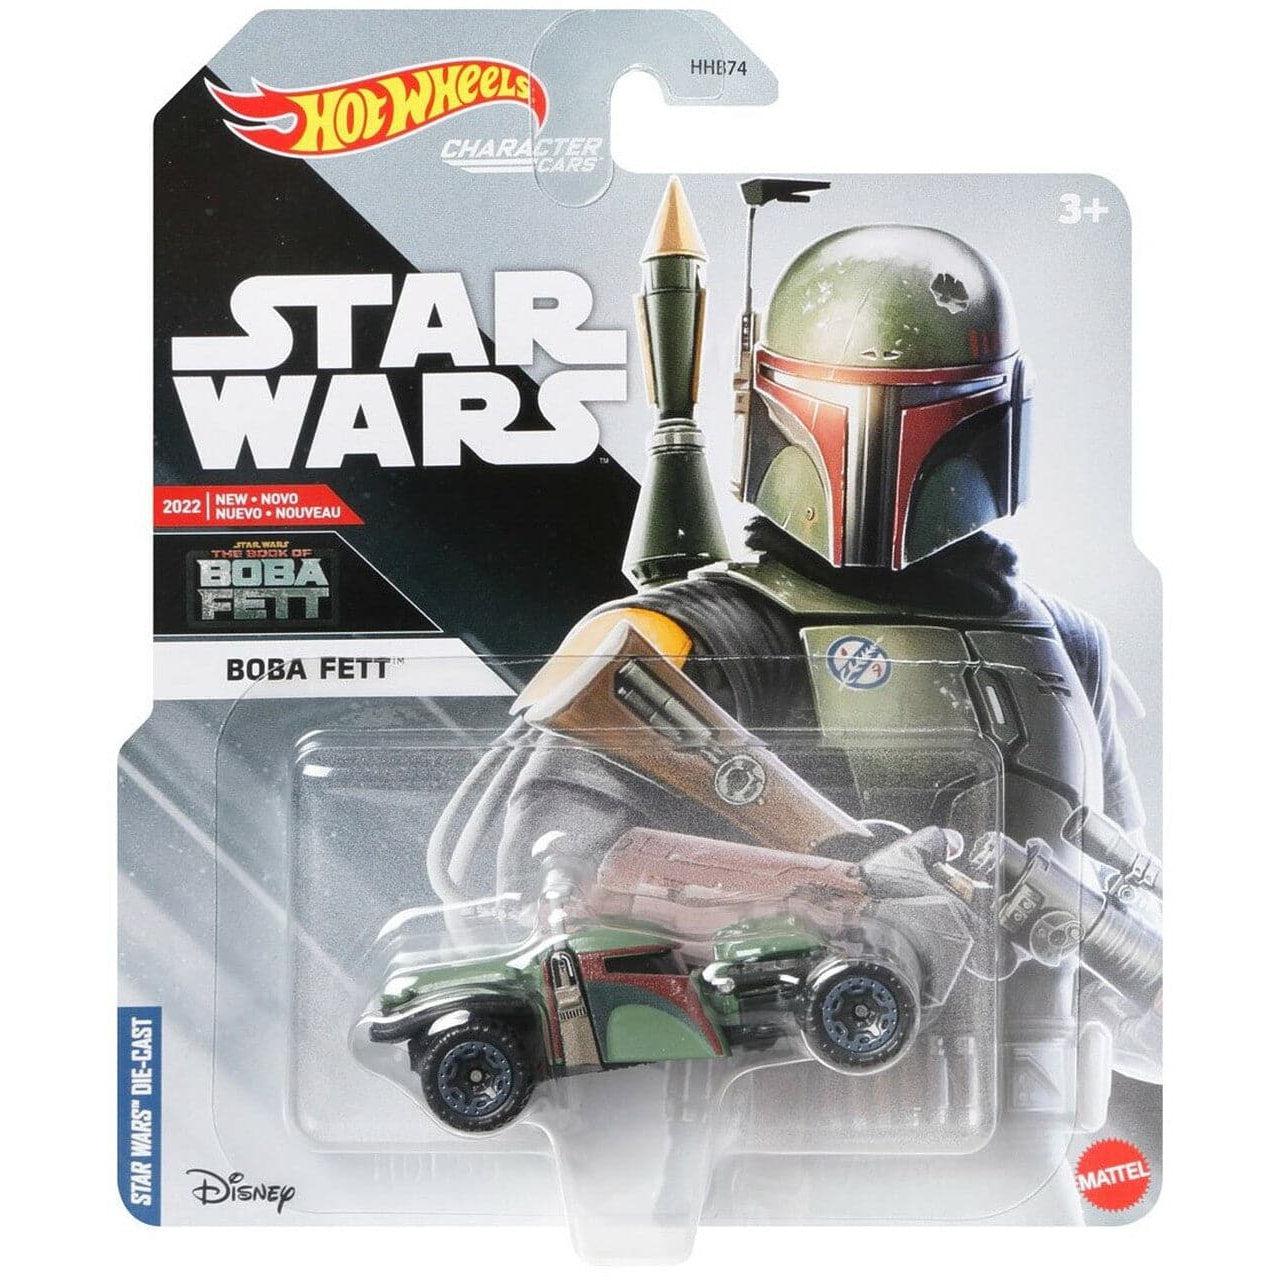 Hot Wheels Star Wars Character Cars 1:64 Scale Die-cast Vehicles